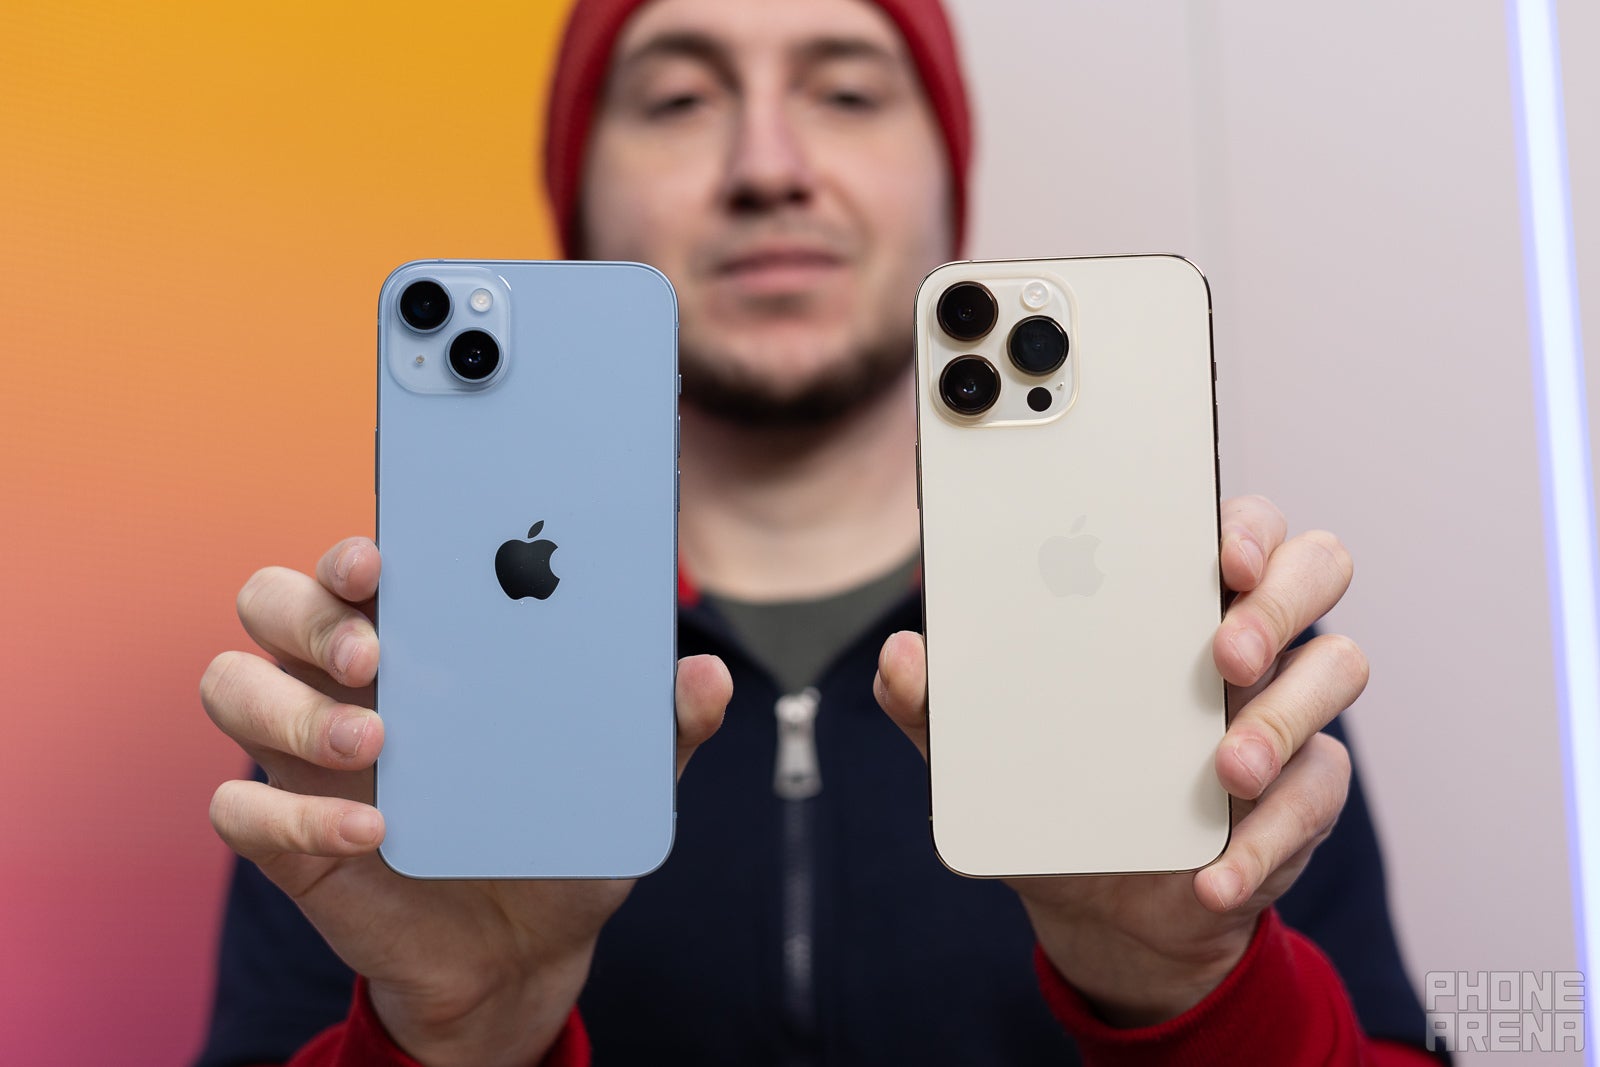 Performance is top-notch on both devices, but the iPhone 14 Pro Max definitely has the upper hand here (Image credit - PhoneArena) - iPhone 14 Pro Max vs iPhone 14 Plus: What are the differences and are they worth it?